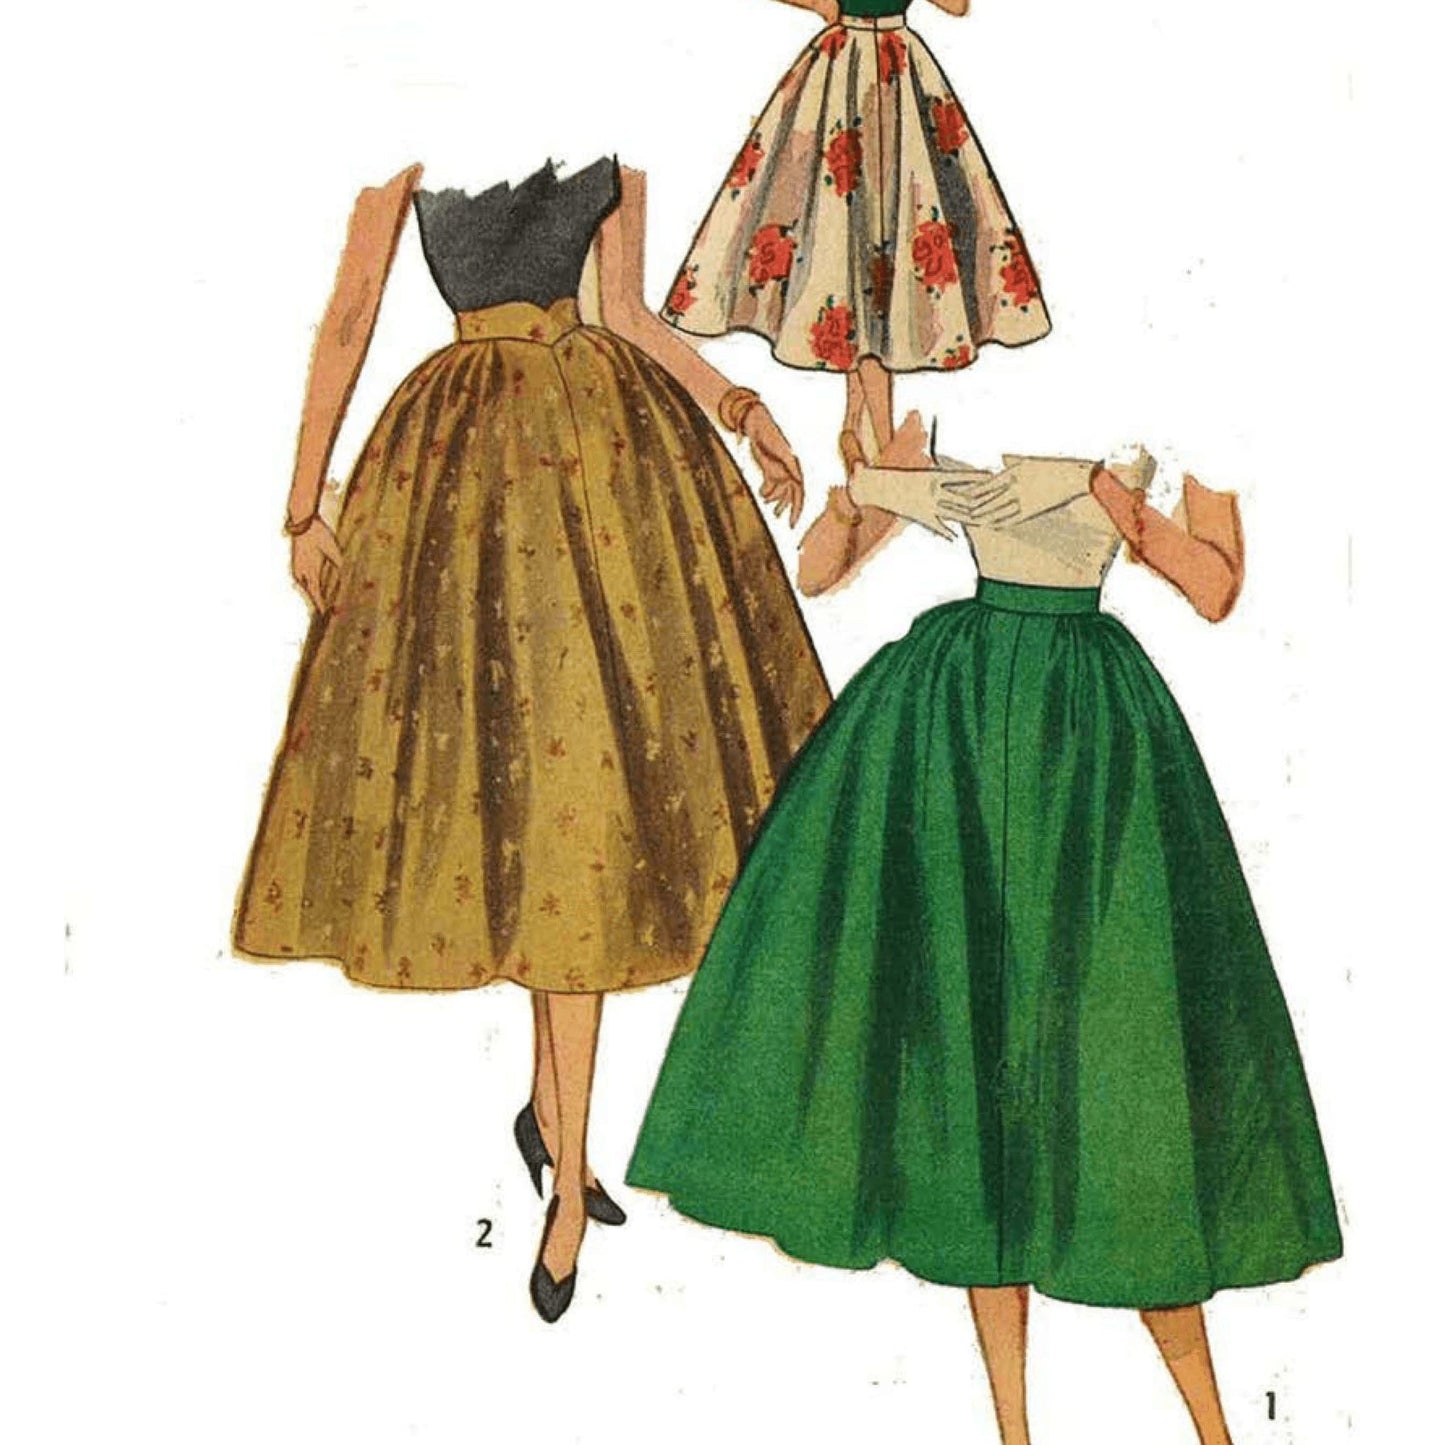 1950s Pattern, Full Circle Skirt, Swing, Rockabilly pattern illustrations in floral fabric, gold brocade and forrest green fabric. Made using sewing pattern Simplicity 4278